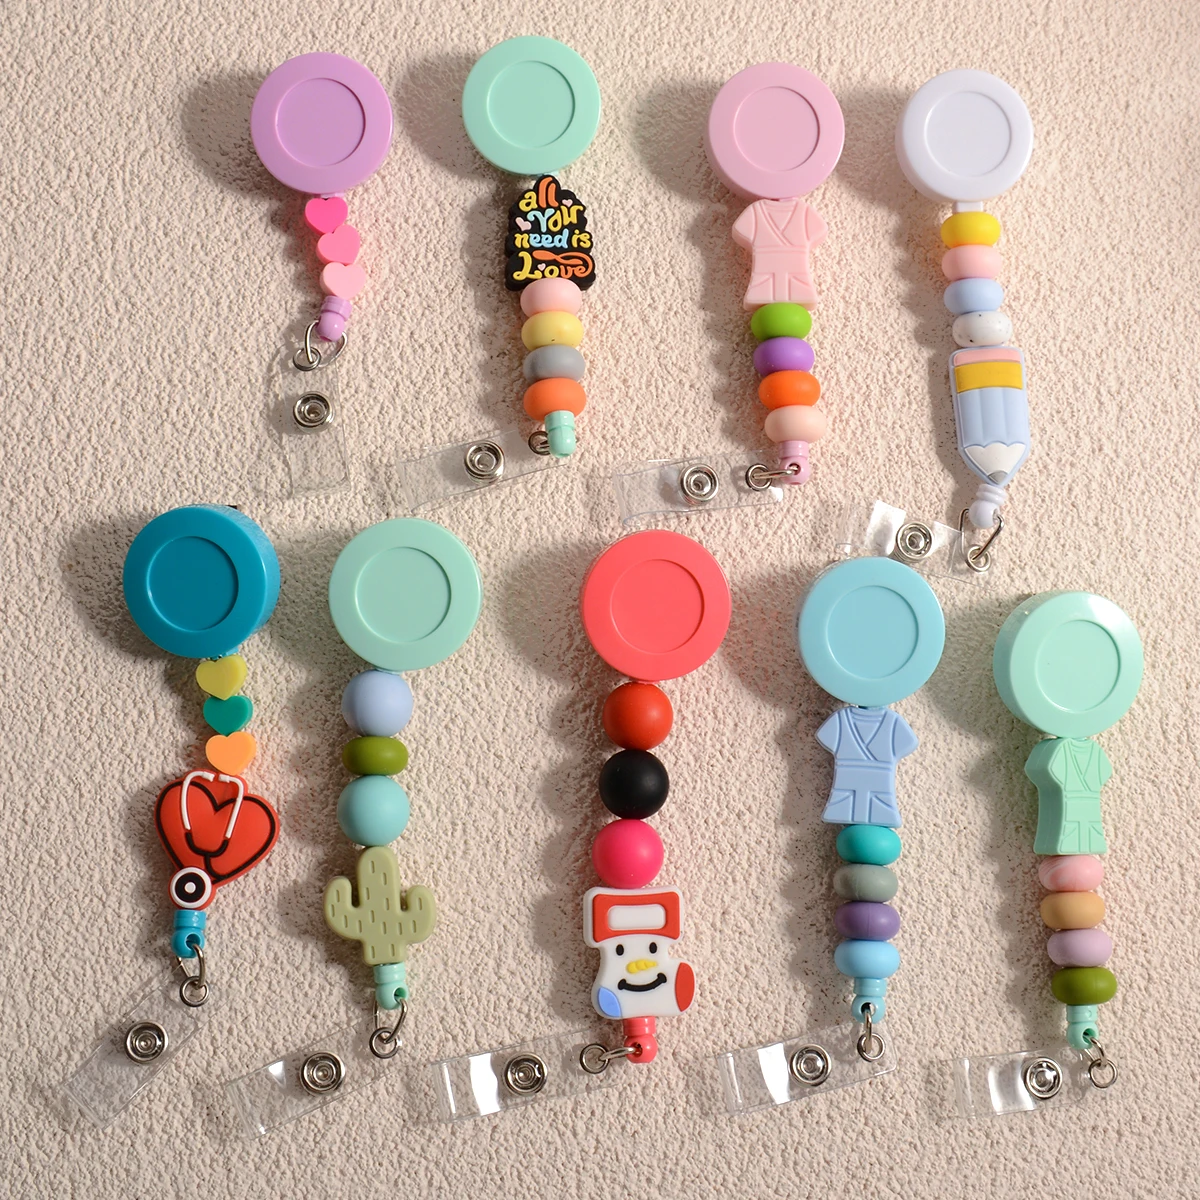 Retractable Silicone Beads Badge Reels BBS Cute Heart Nurse Id Badge Holders with Alligator CliP for Nursing Teachers Office round cute animals retractable lanyard tag badge reel nurse doctor student exhibition id card clips badge holders with keychain